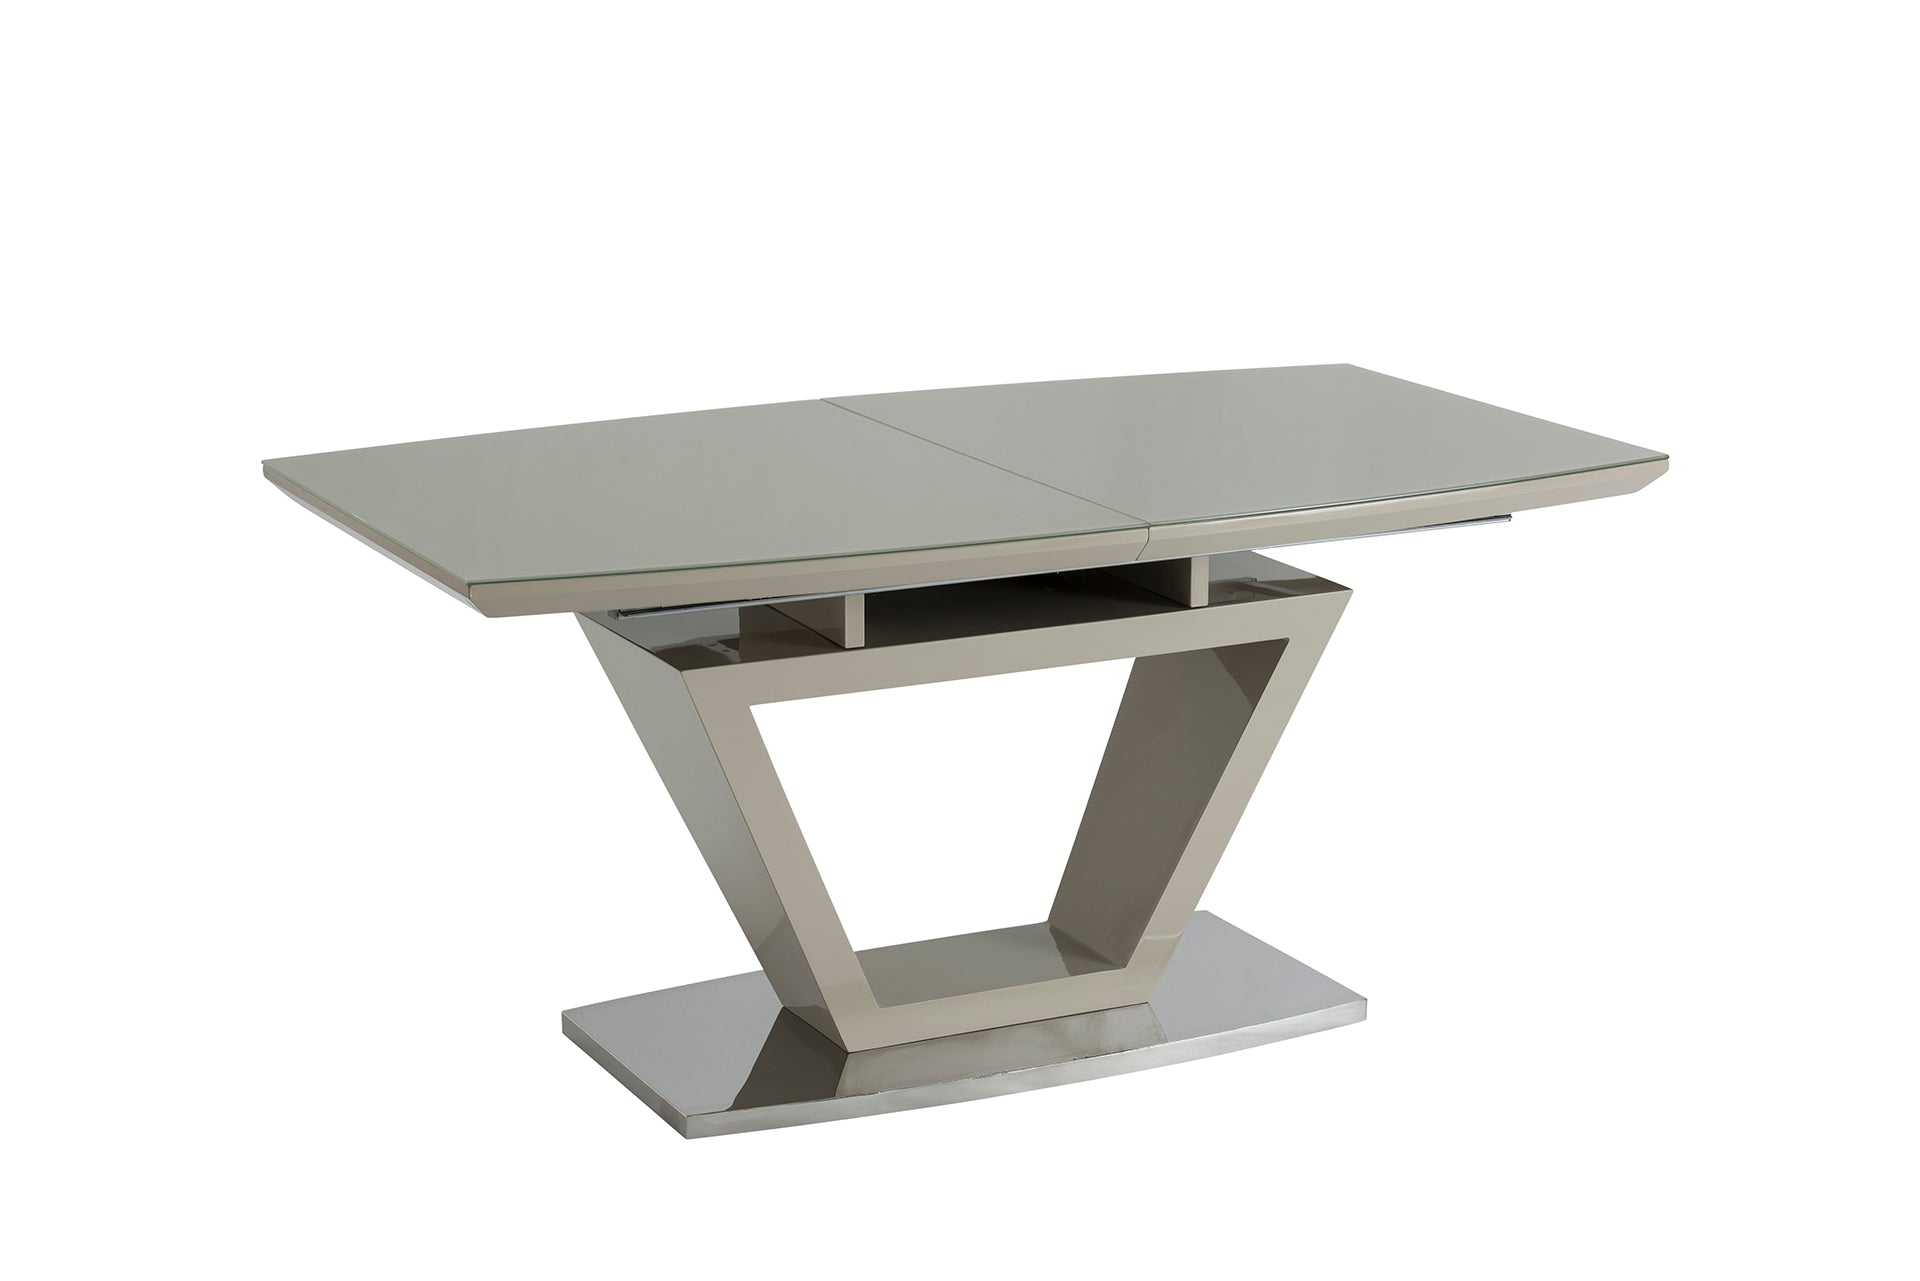  Latte Glass Base Dining Table